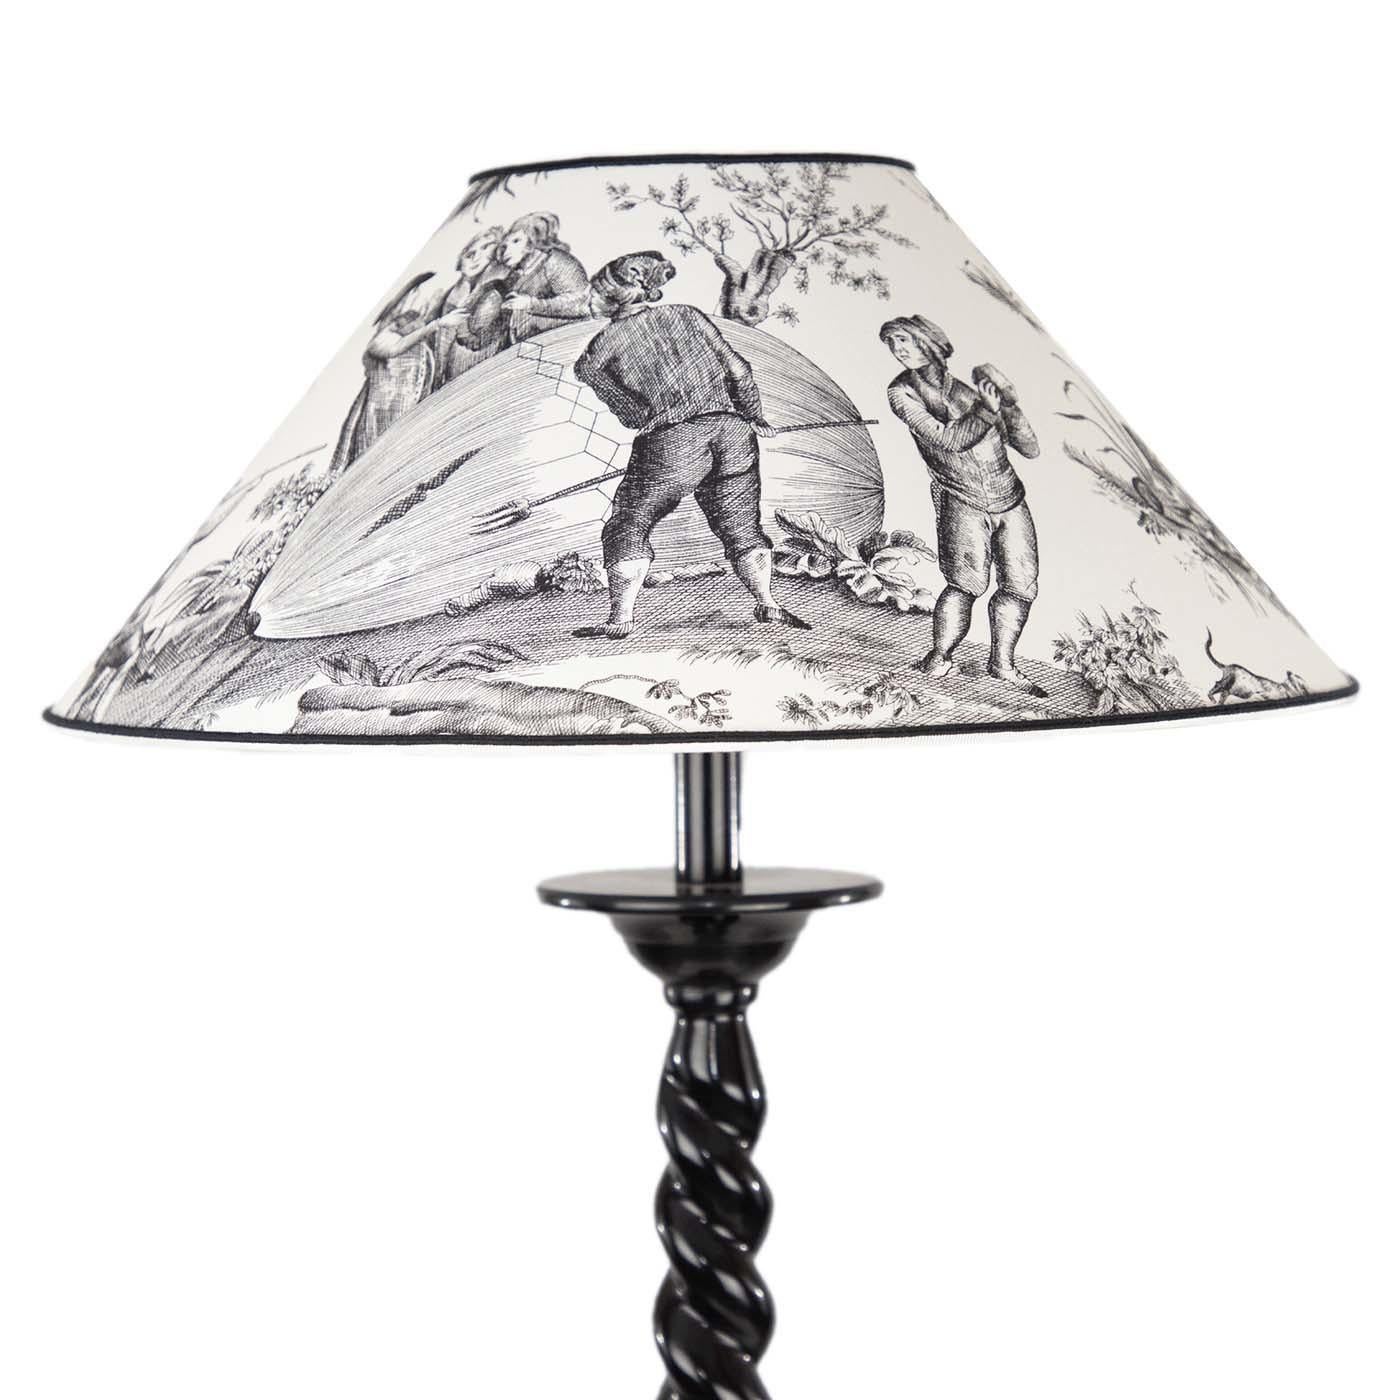 From the Peca Italia Collection, the Ballon de Gonesse Lamp features a torchon black metal base and a cone-shaped lampshade in fabric printed with a delightful, original French classic toile de jouy. By purchasing a pair of lamps, one can be placed